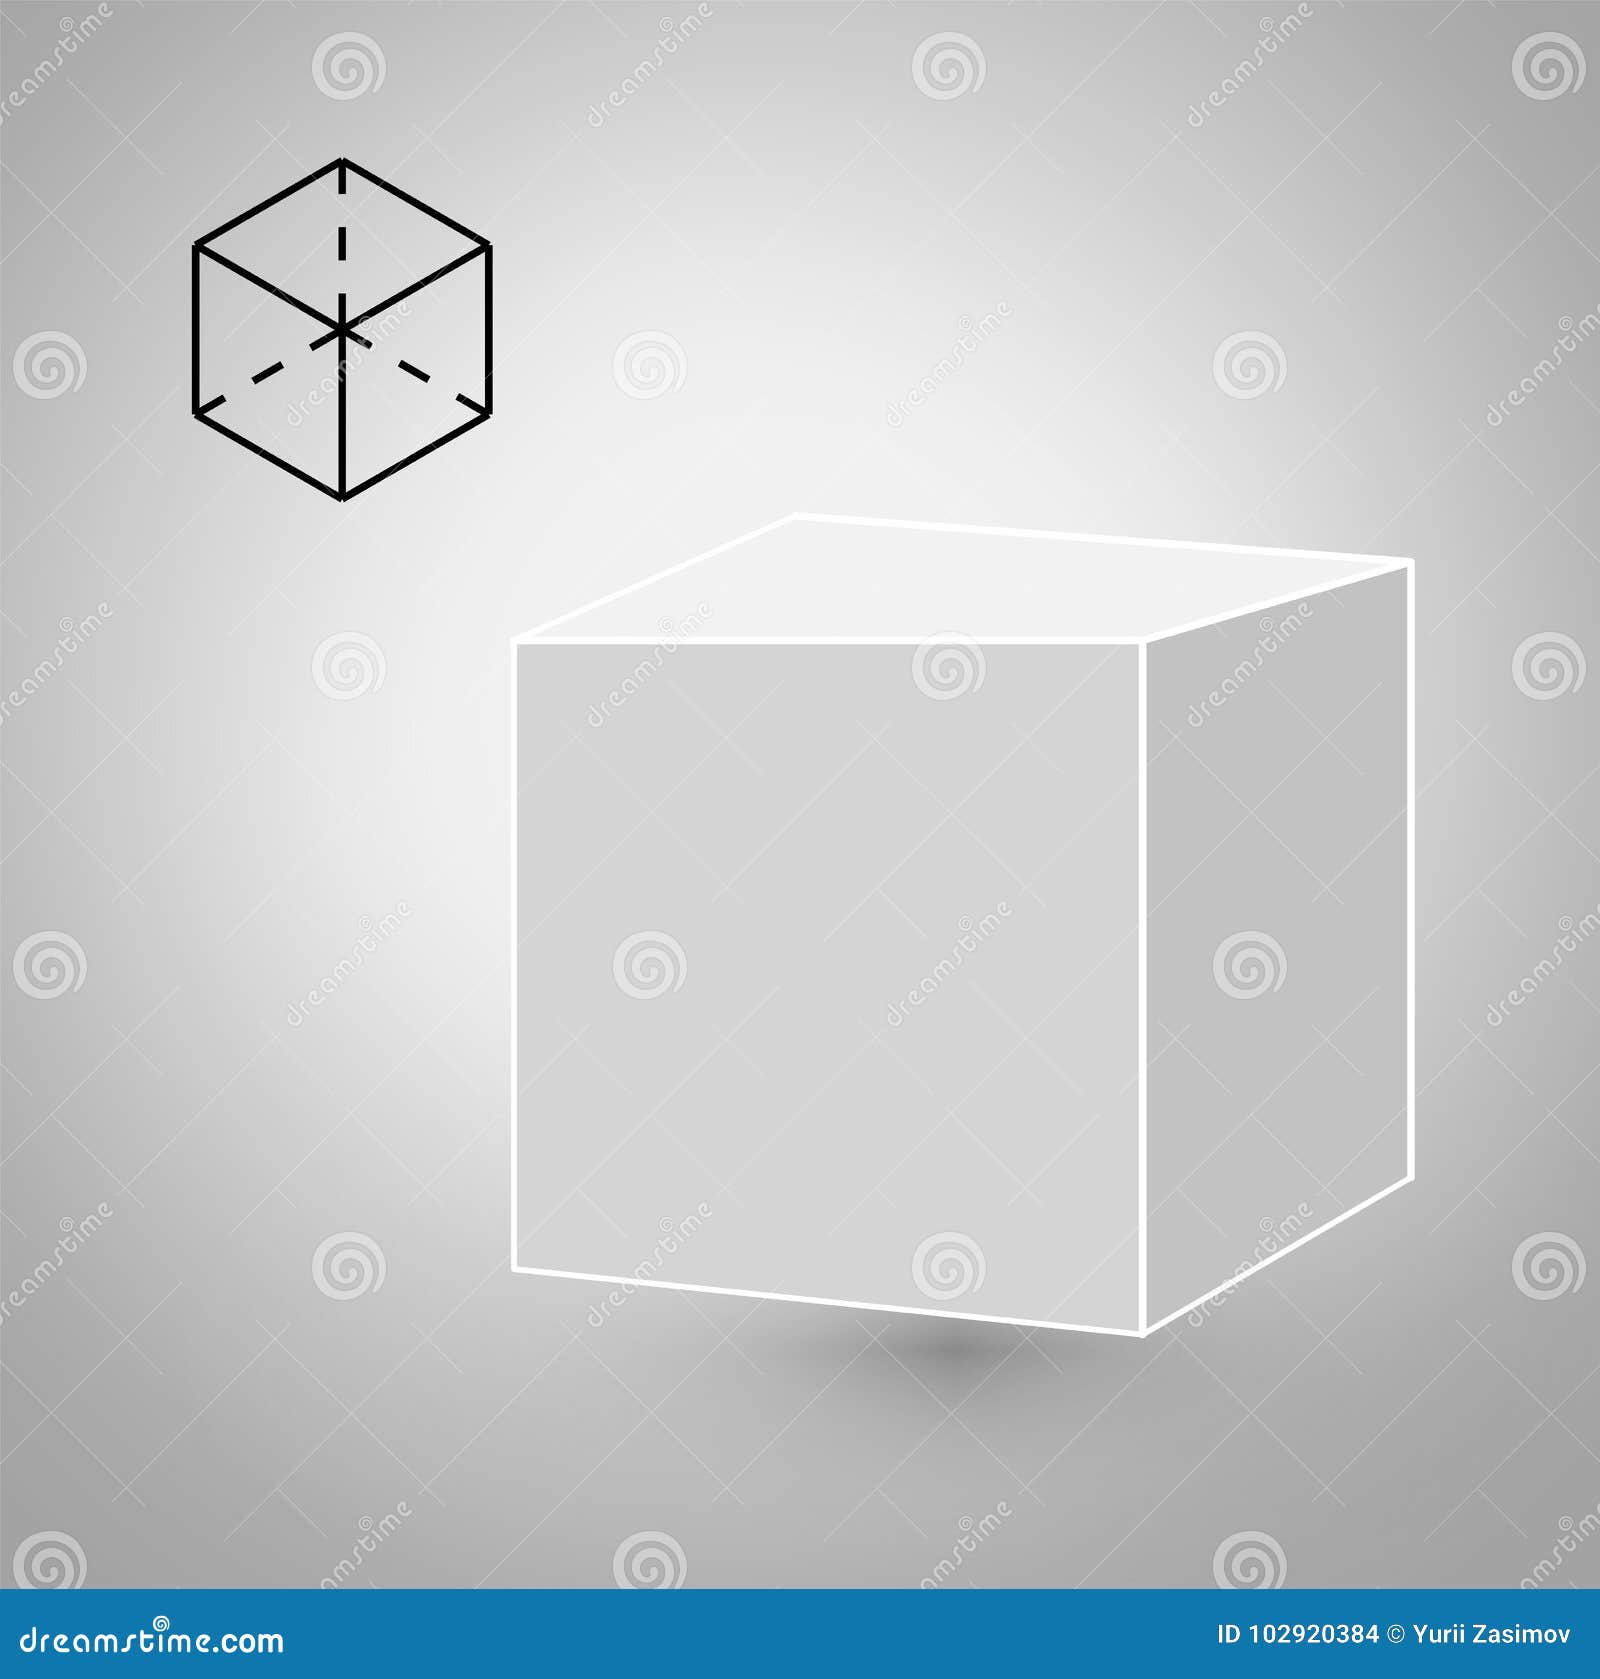 Cube is a Geometric Figure. Hipster Fashion Minimalist Design. Film Solid  Bodies Stock Vector - Illustration of graphic, figure: 102920384